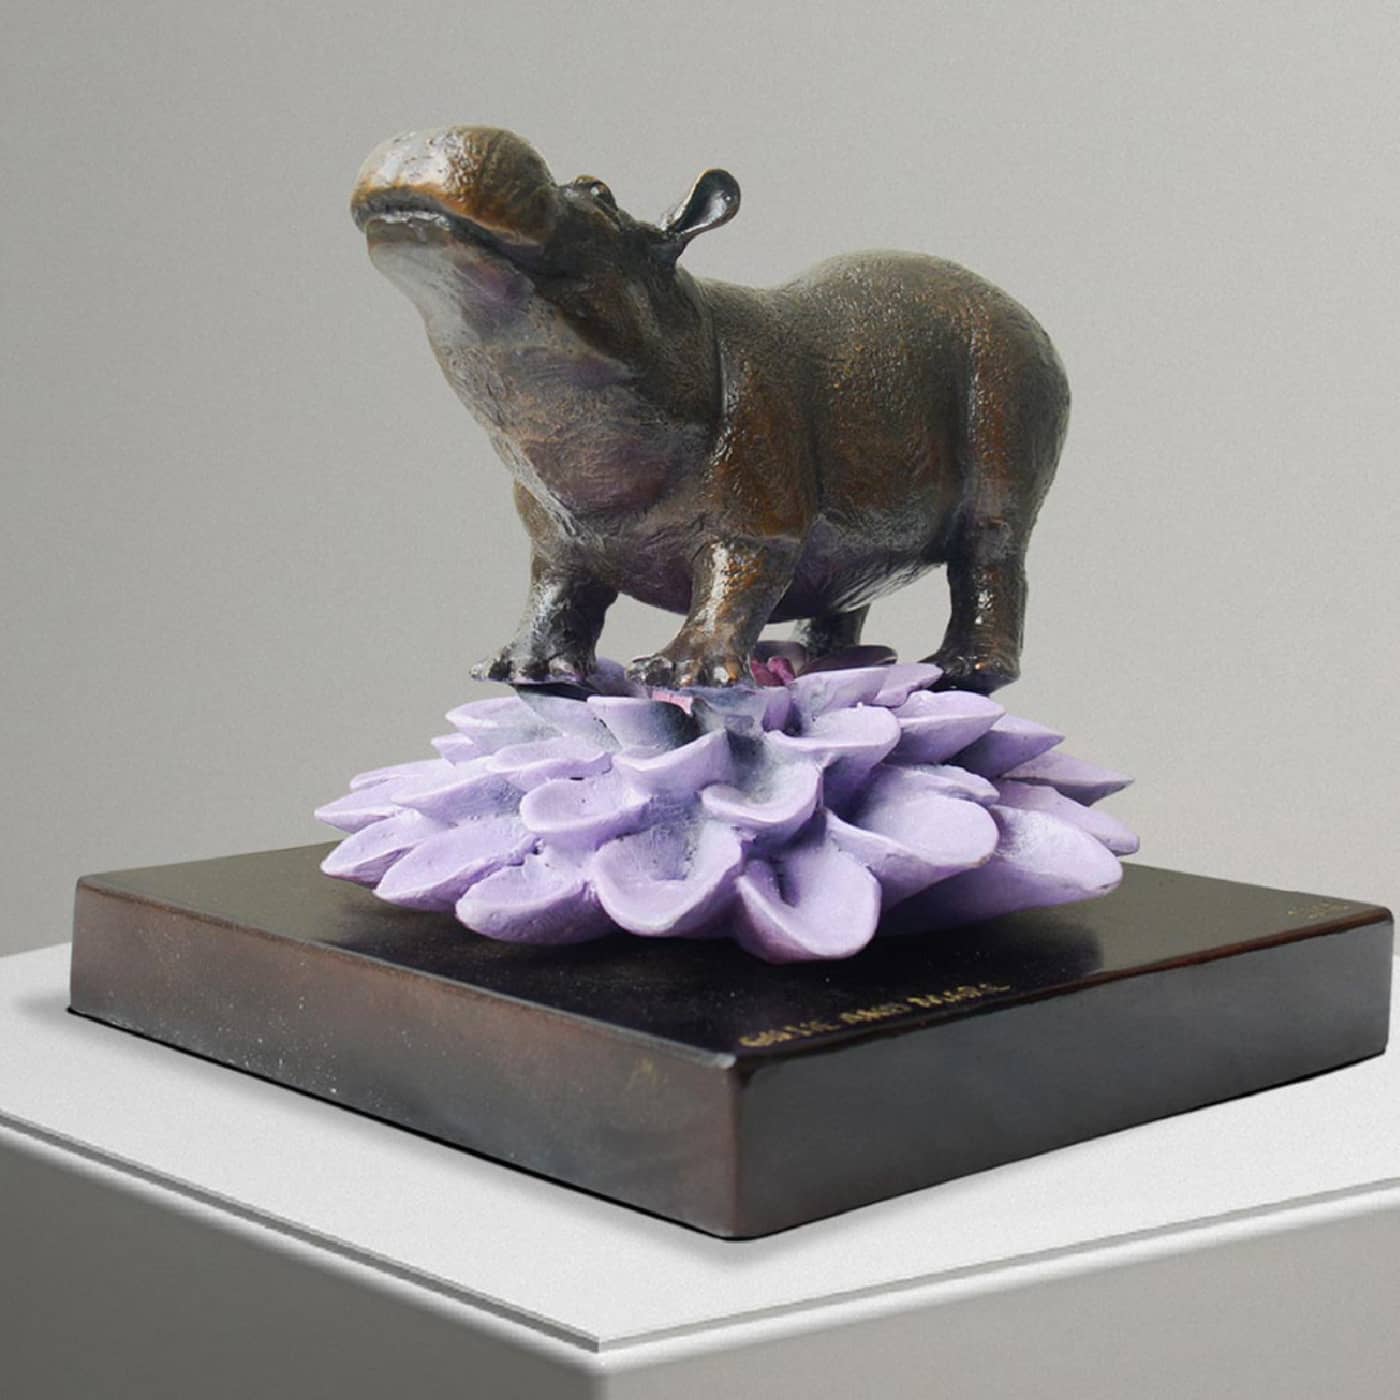 Gillie and Marc Sculpture ~ 'The Hippo Was in Bloom' - Curate Art & Design Gallery Sorrento Mornington Peninsula Melbourne